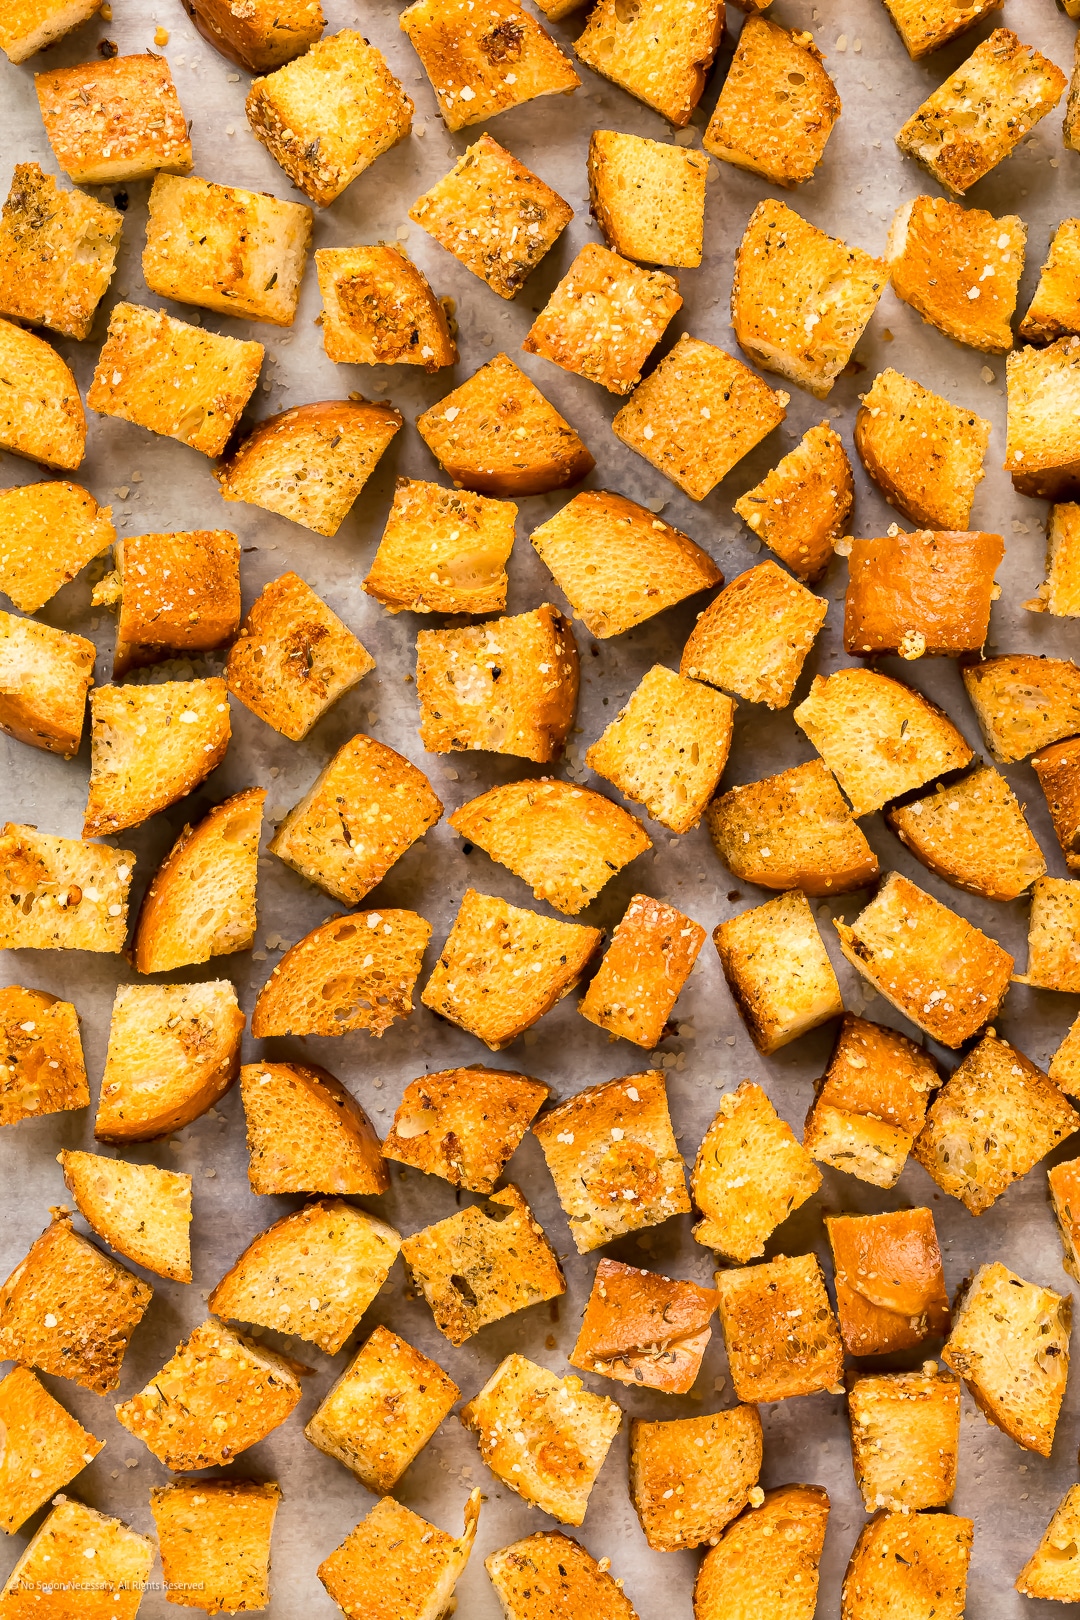 Close-up photo illustrating the crispy texture of croutons baked in the oven.